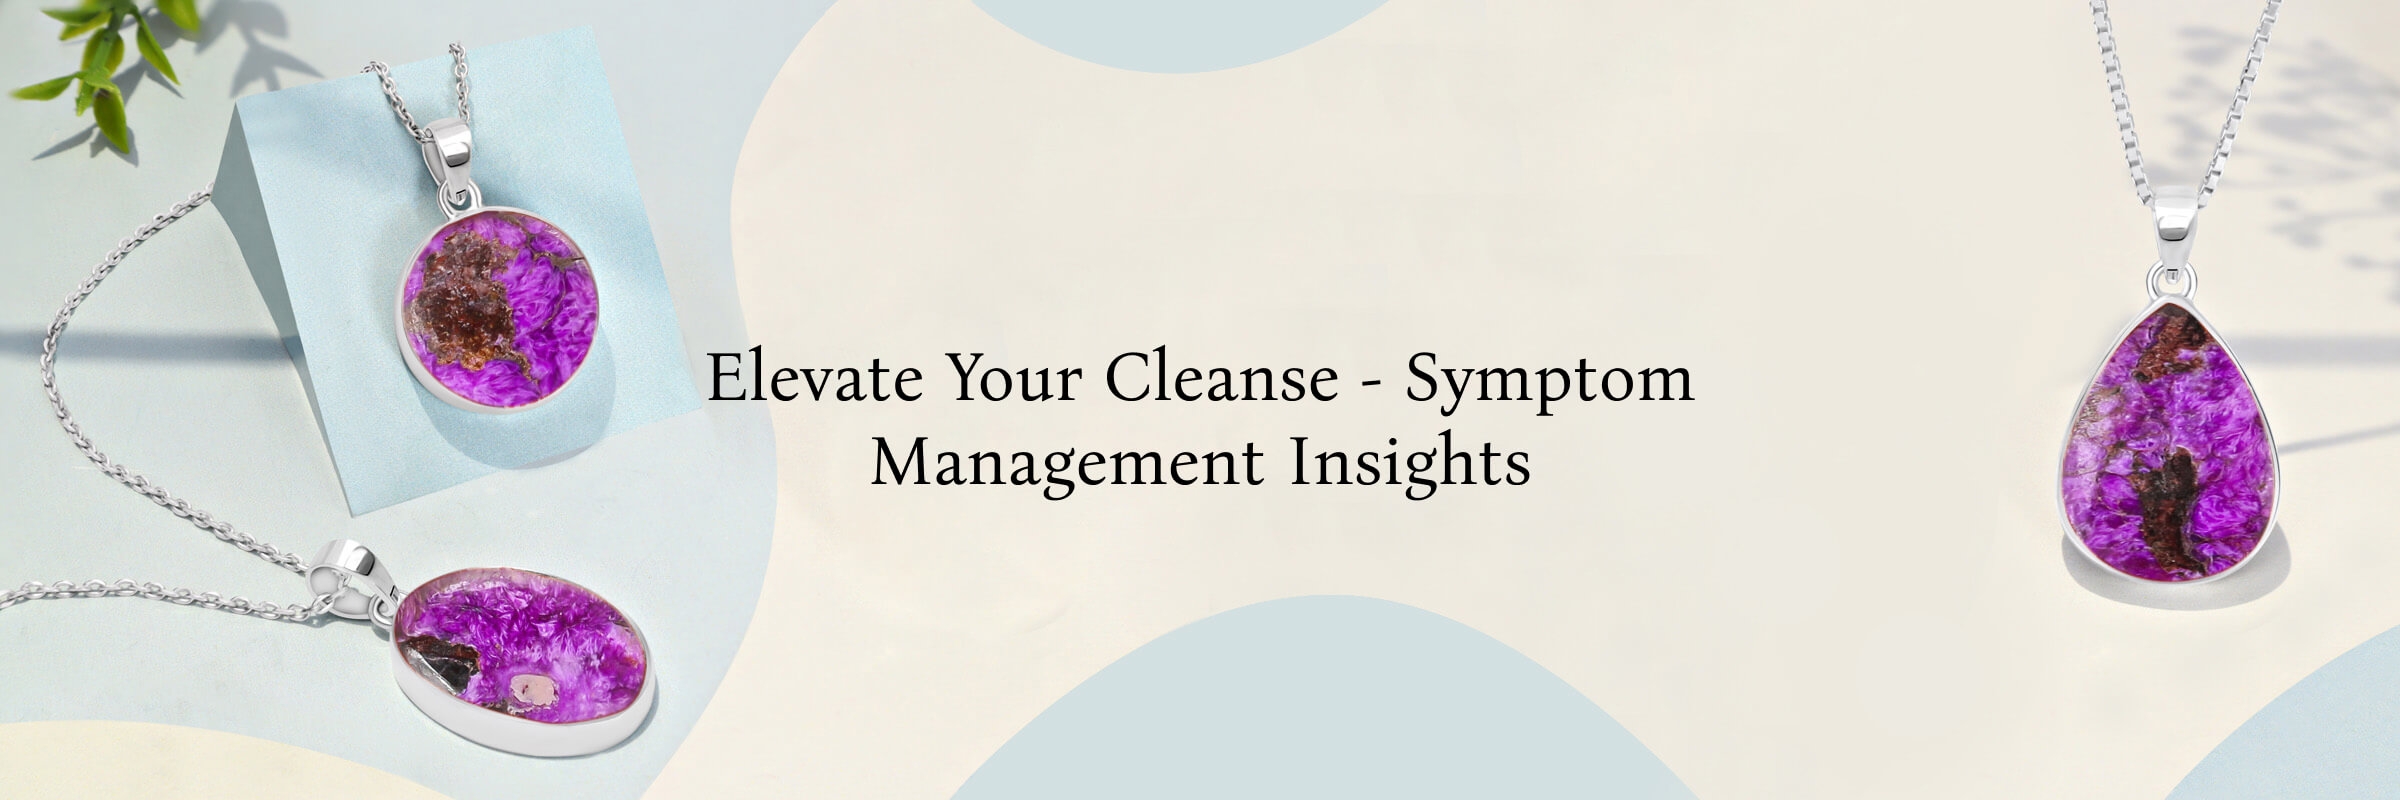 Managing Symptoms and Aiding a Cleansing Program